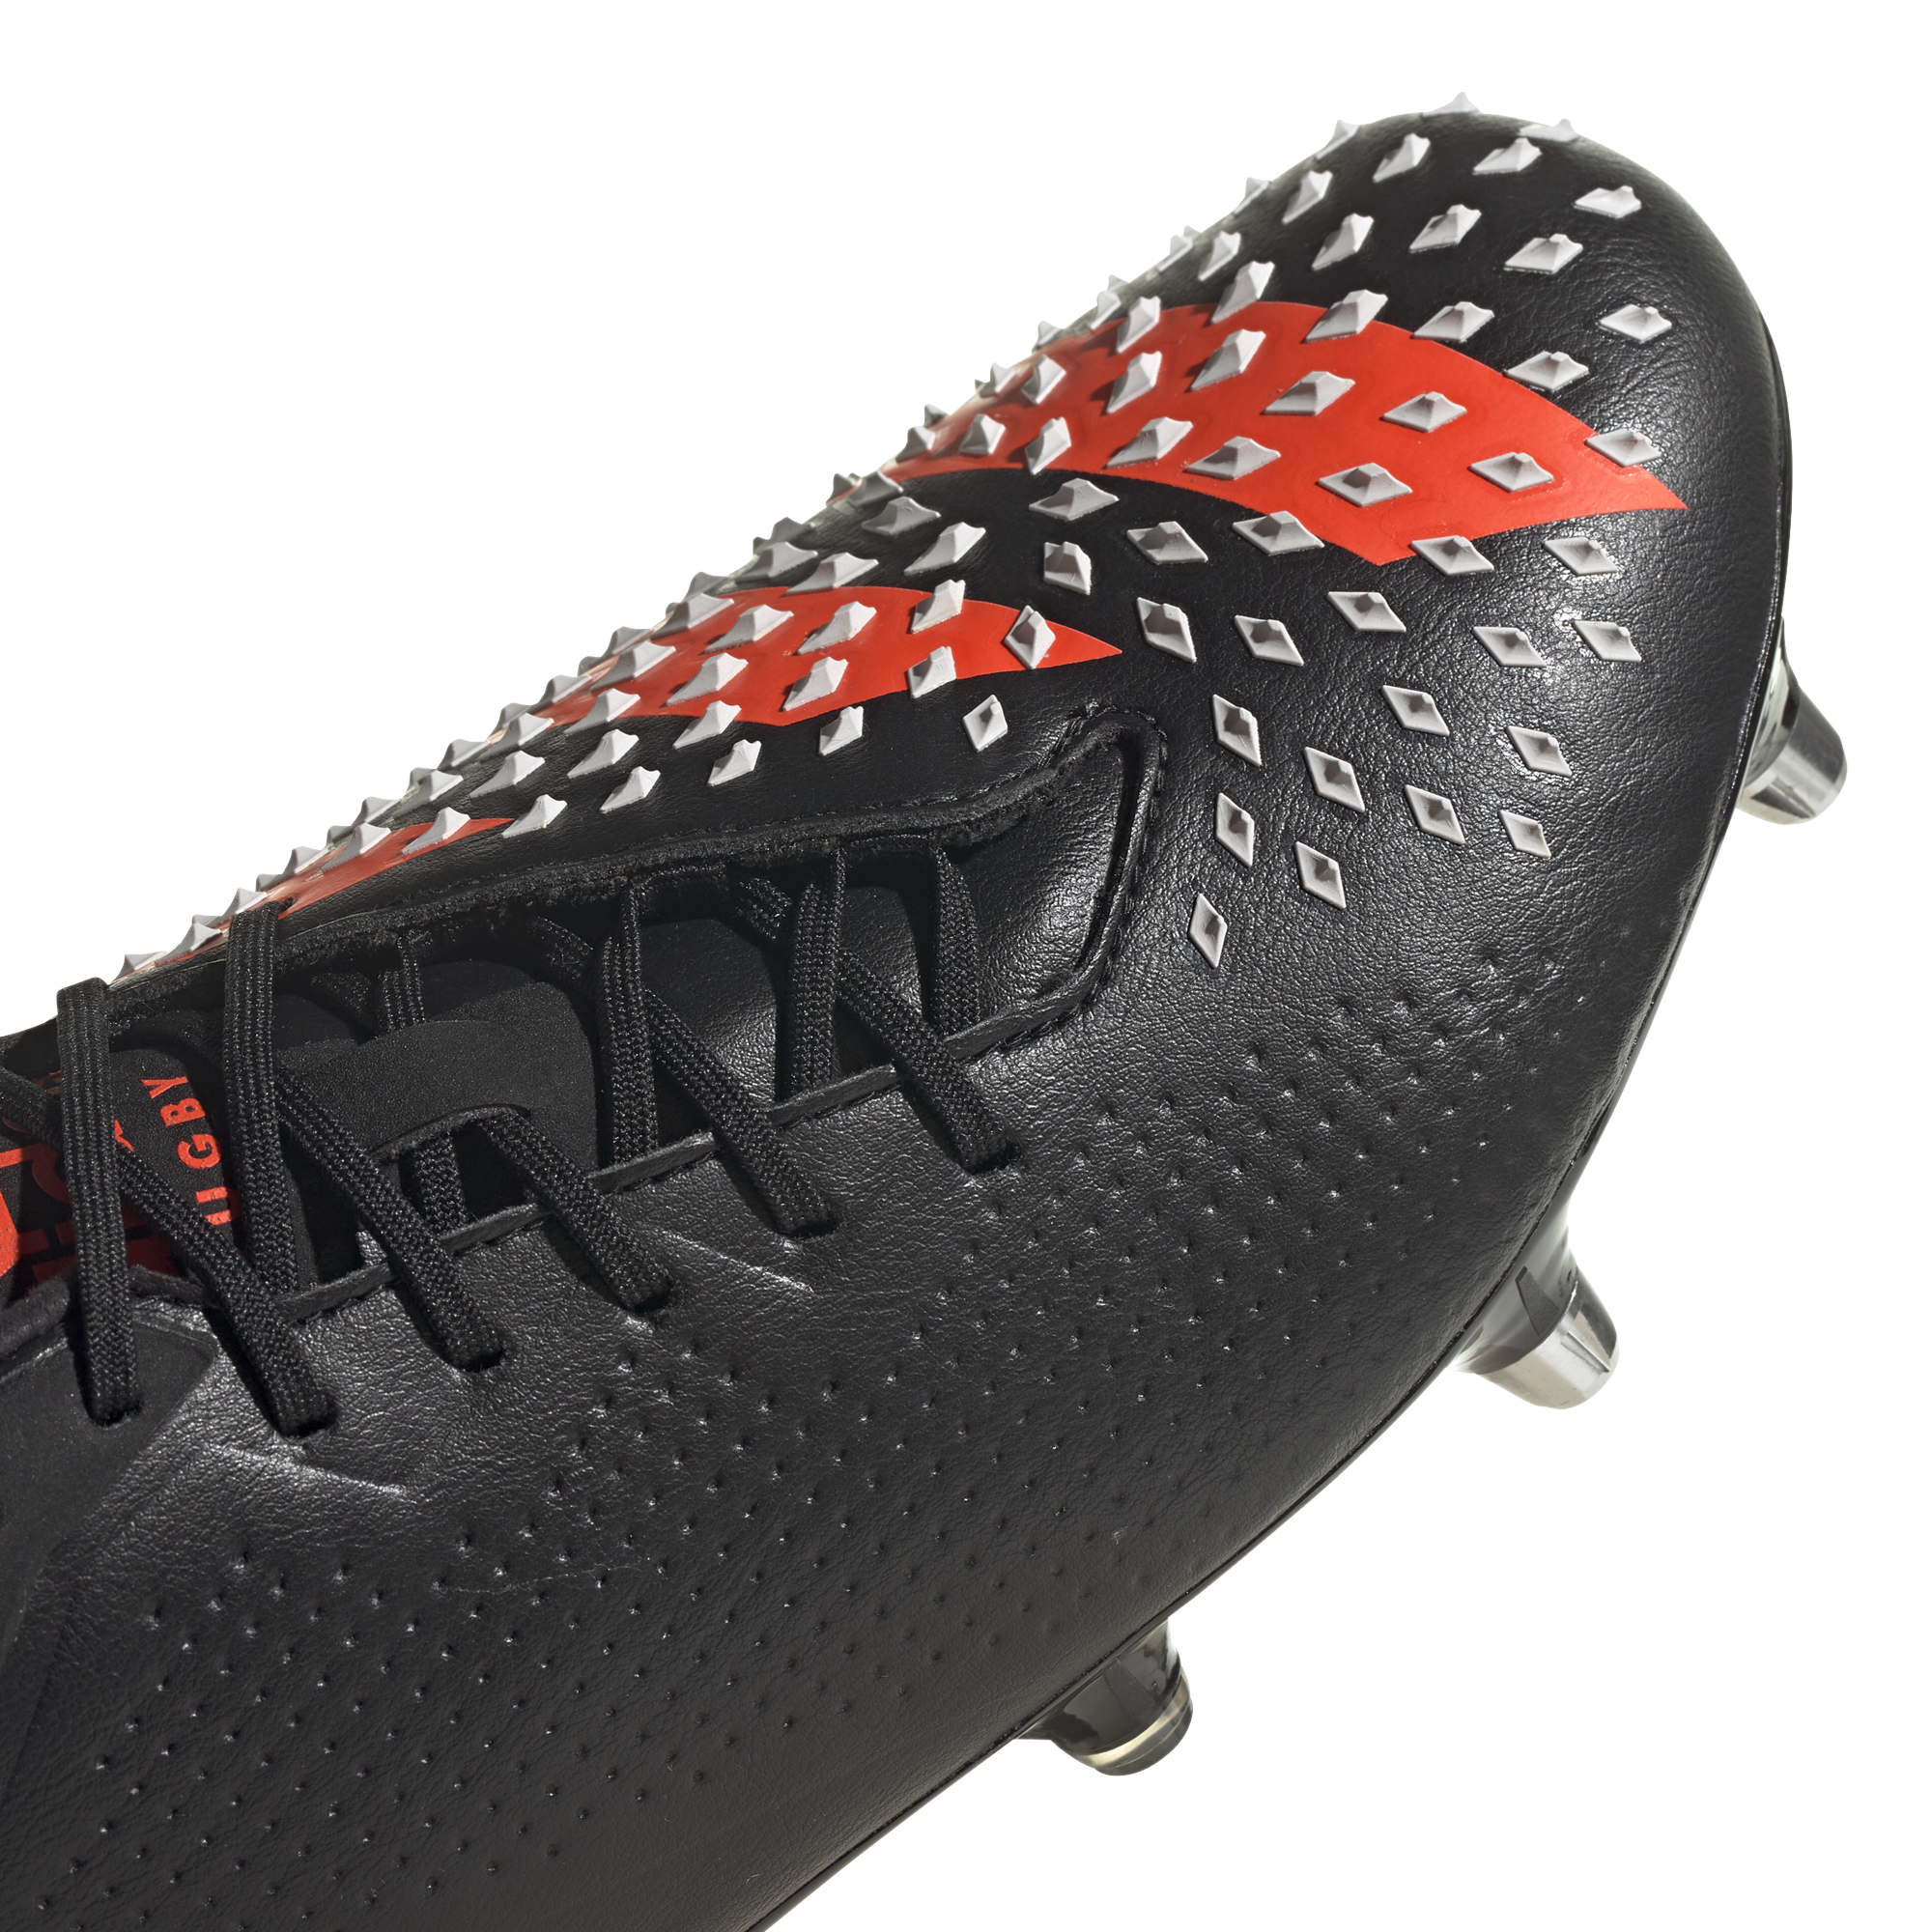 Adidas Predator Malice SG Rugby Boots | Rugby Now